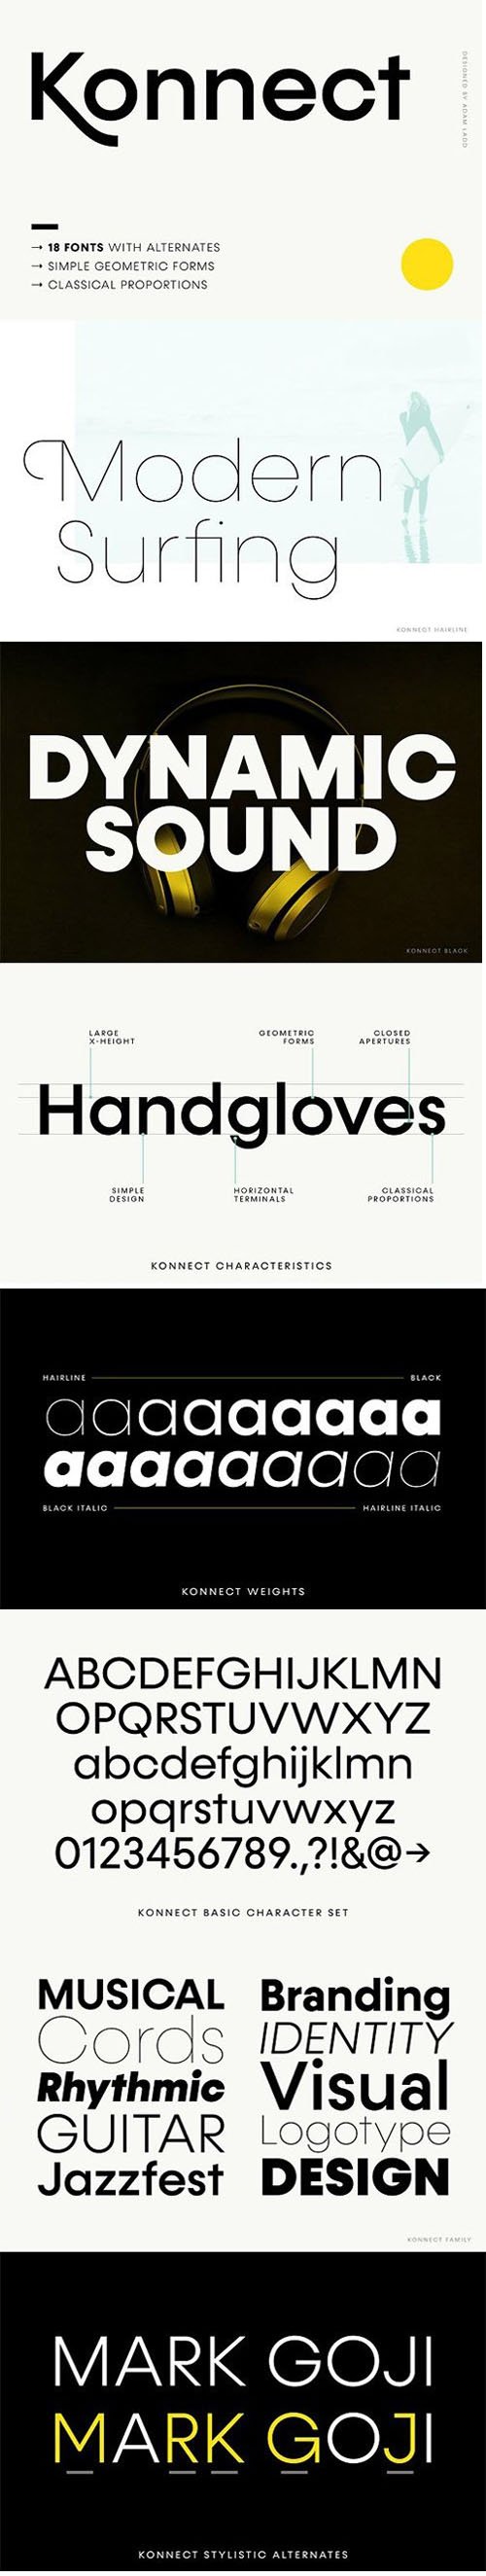 Konnect Font Family [18-Weights]